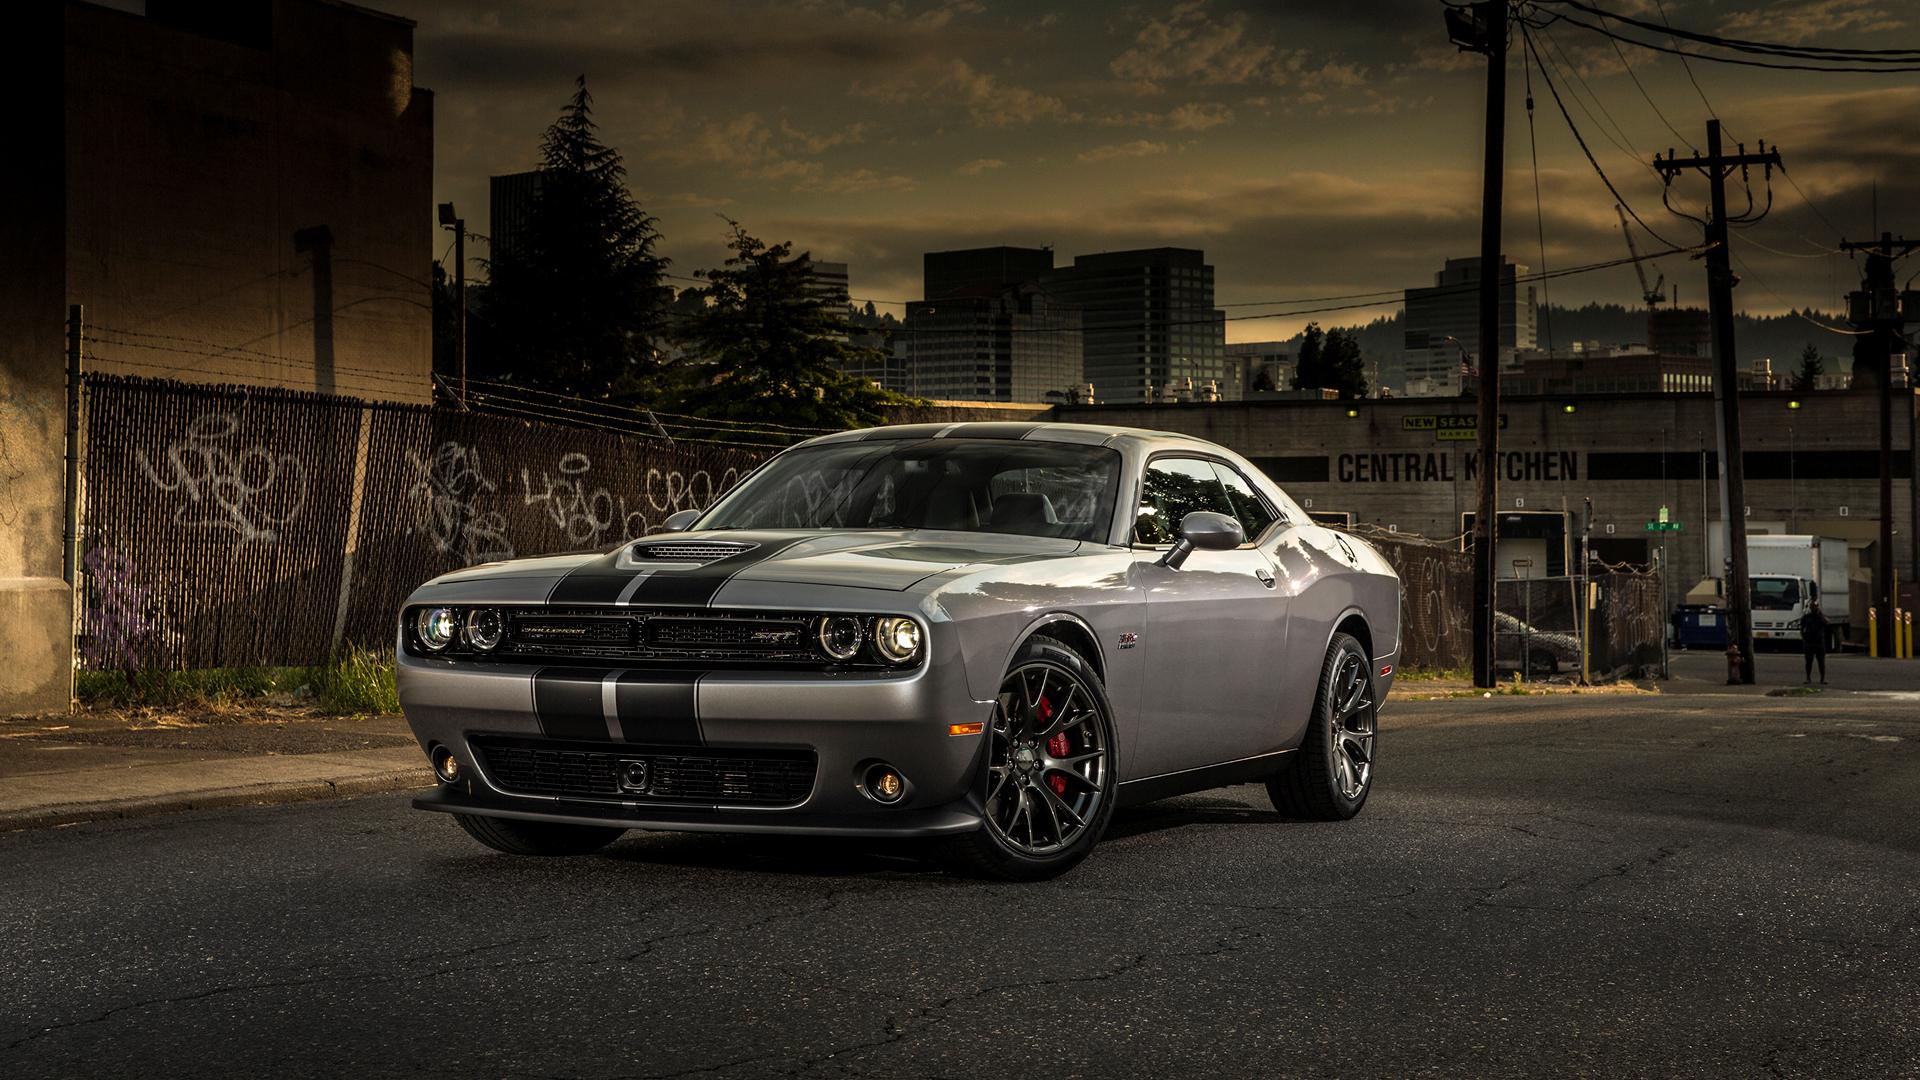 Gorgeous Dodge Challenger Wallpaper Full HD Pictures